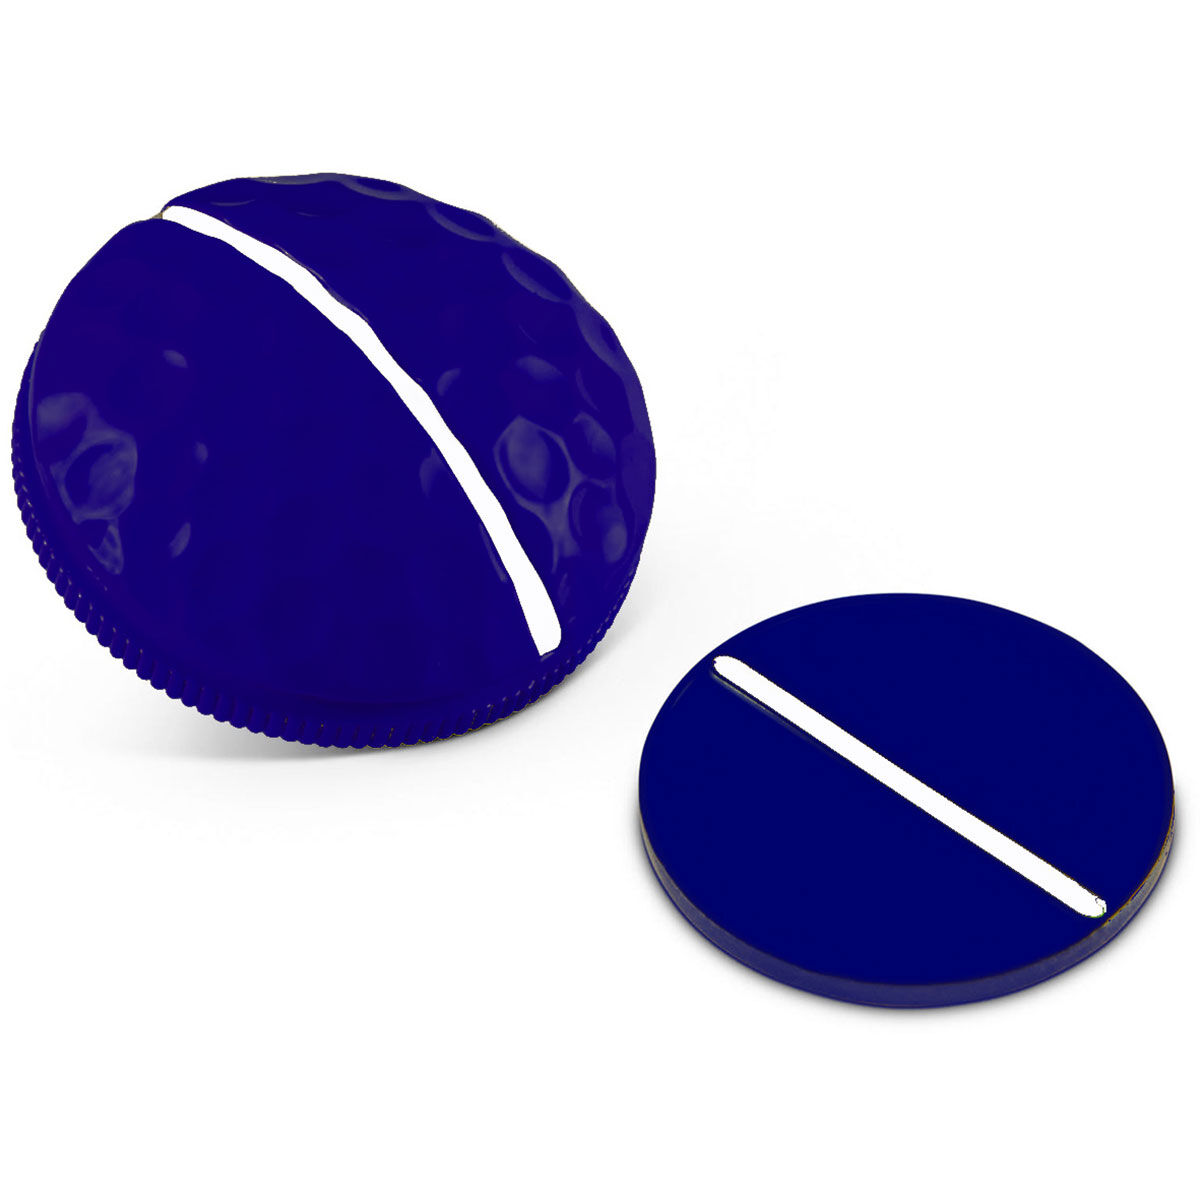 On Point Navy Blue 1 Rail Dimpled-Domed Golf Ball Marker | American Golf, One Size